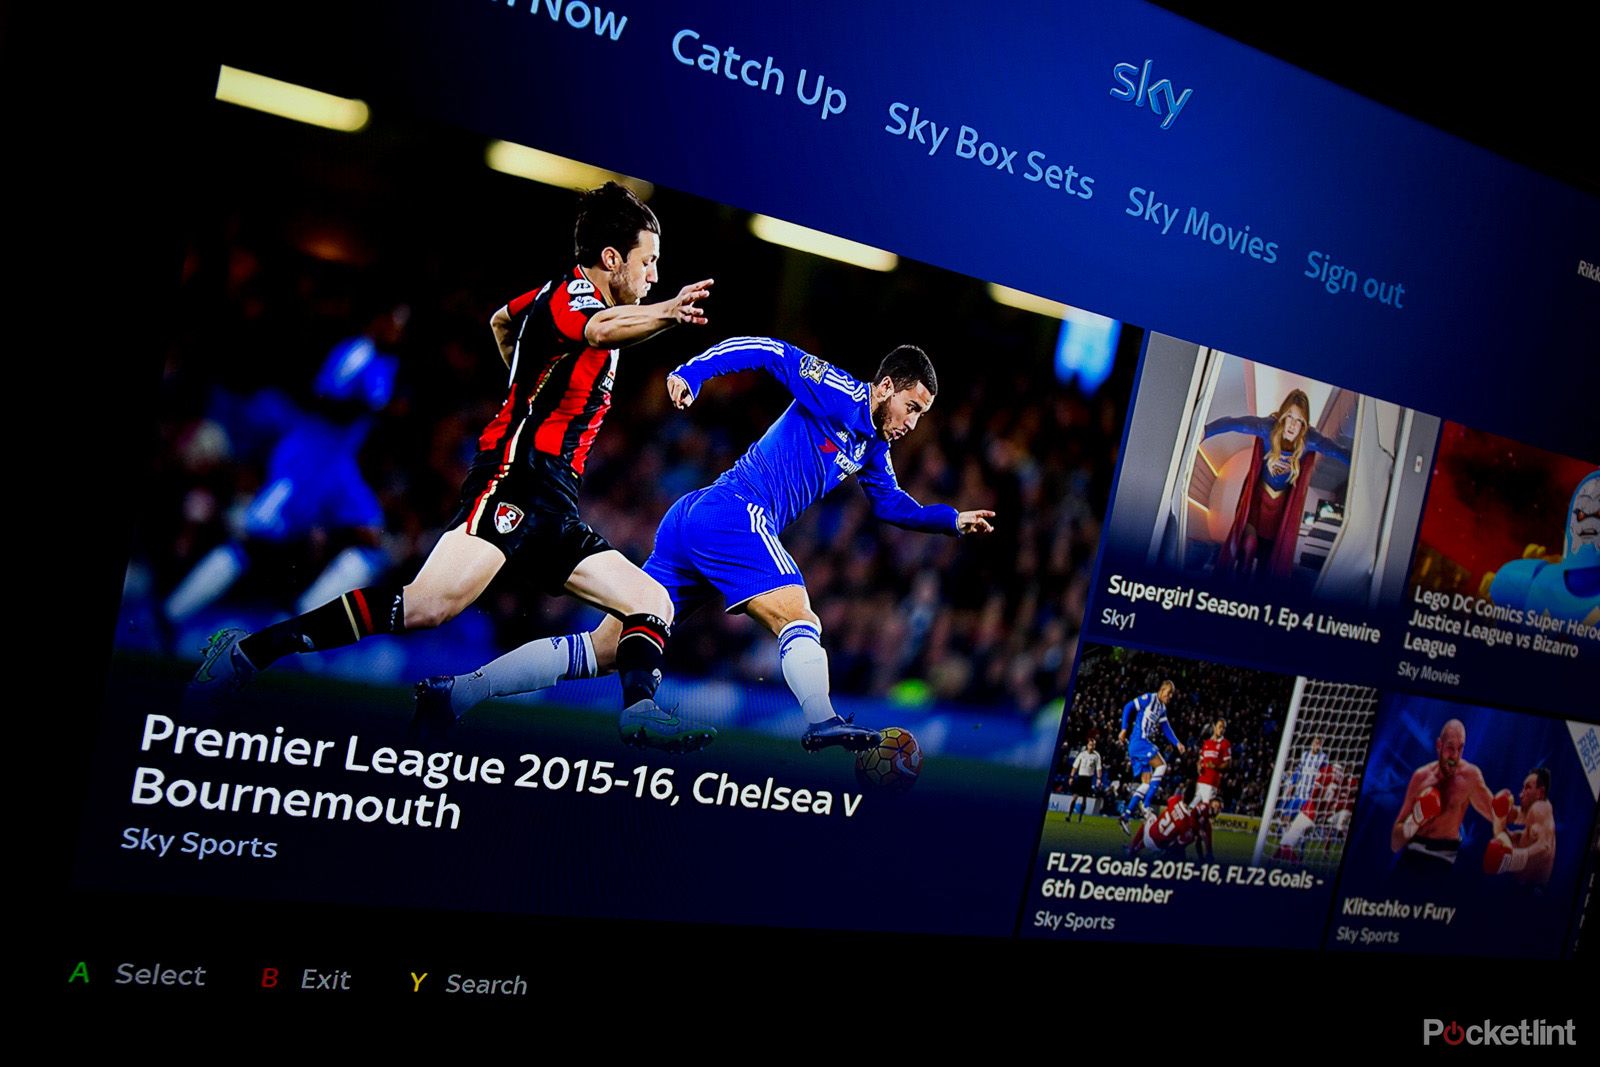 watch sky on xbox one from today tv from sky app arrives to give that sky go experience image 1